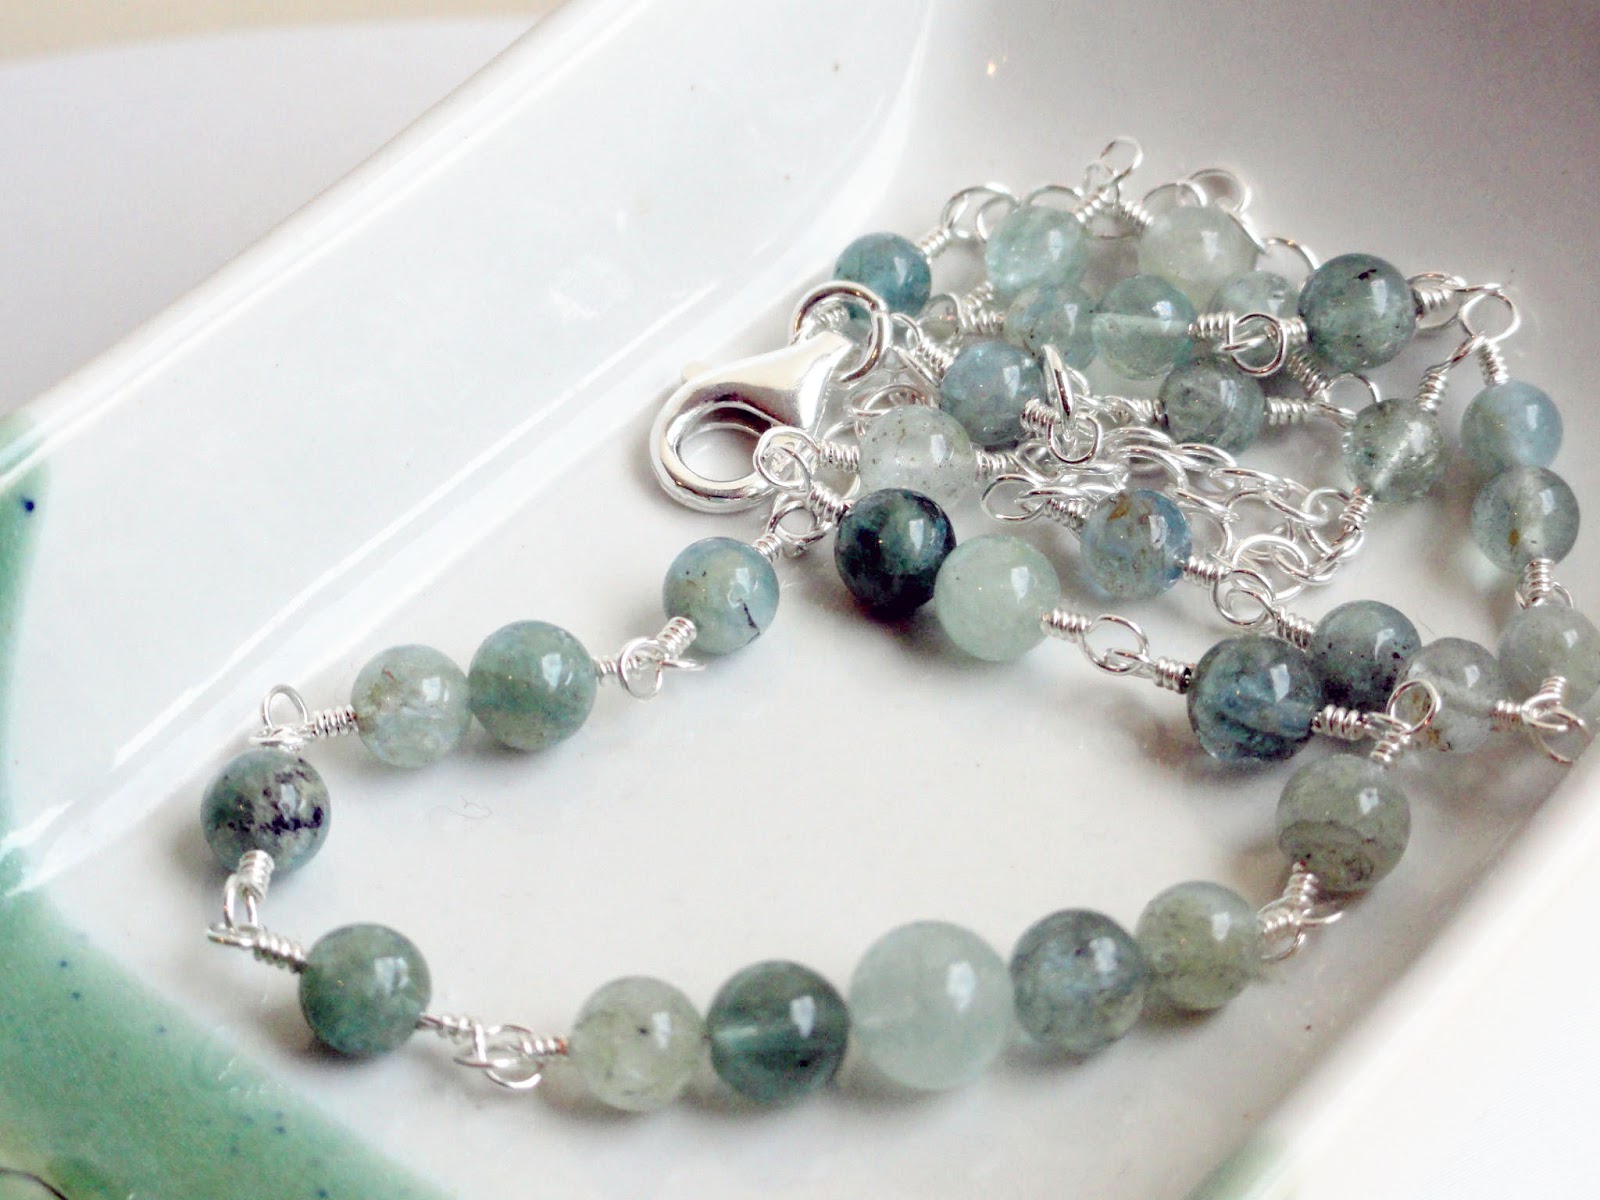 Inspiring handcrafted jewelry: Aquamarine necklace - listed